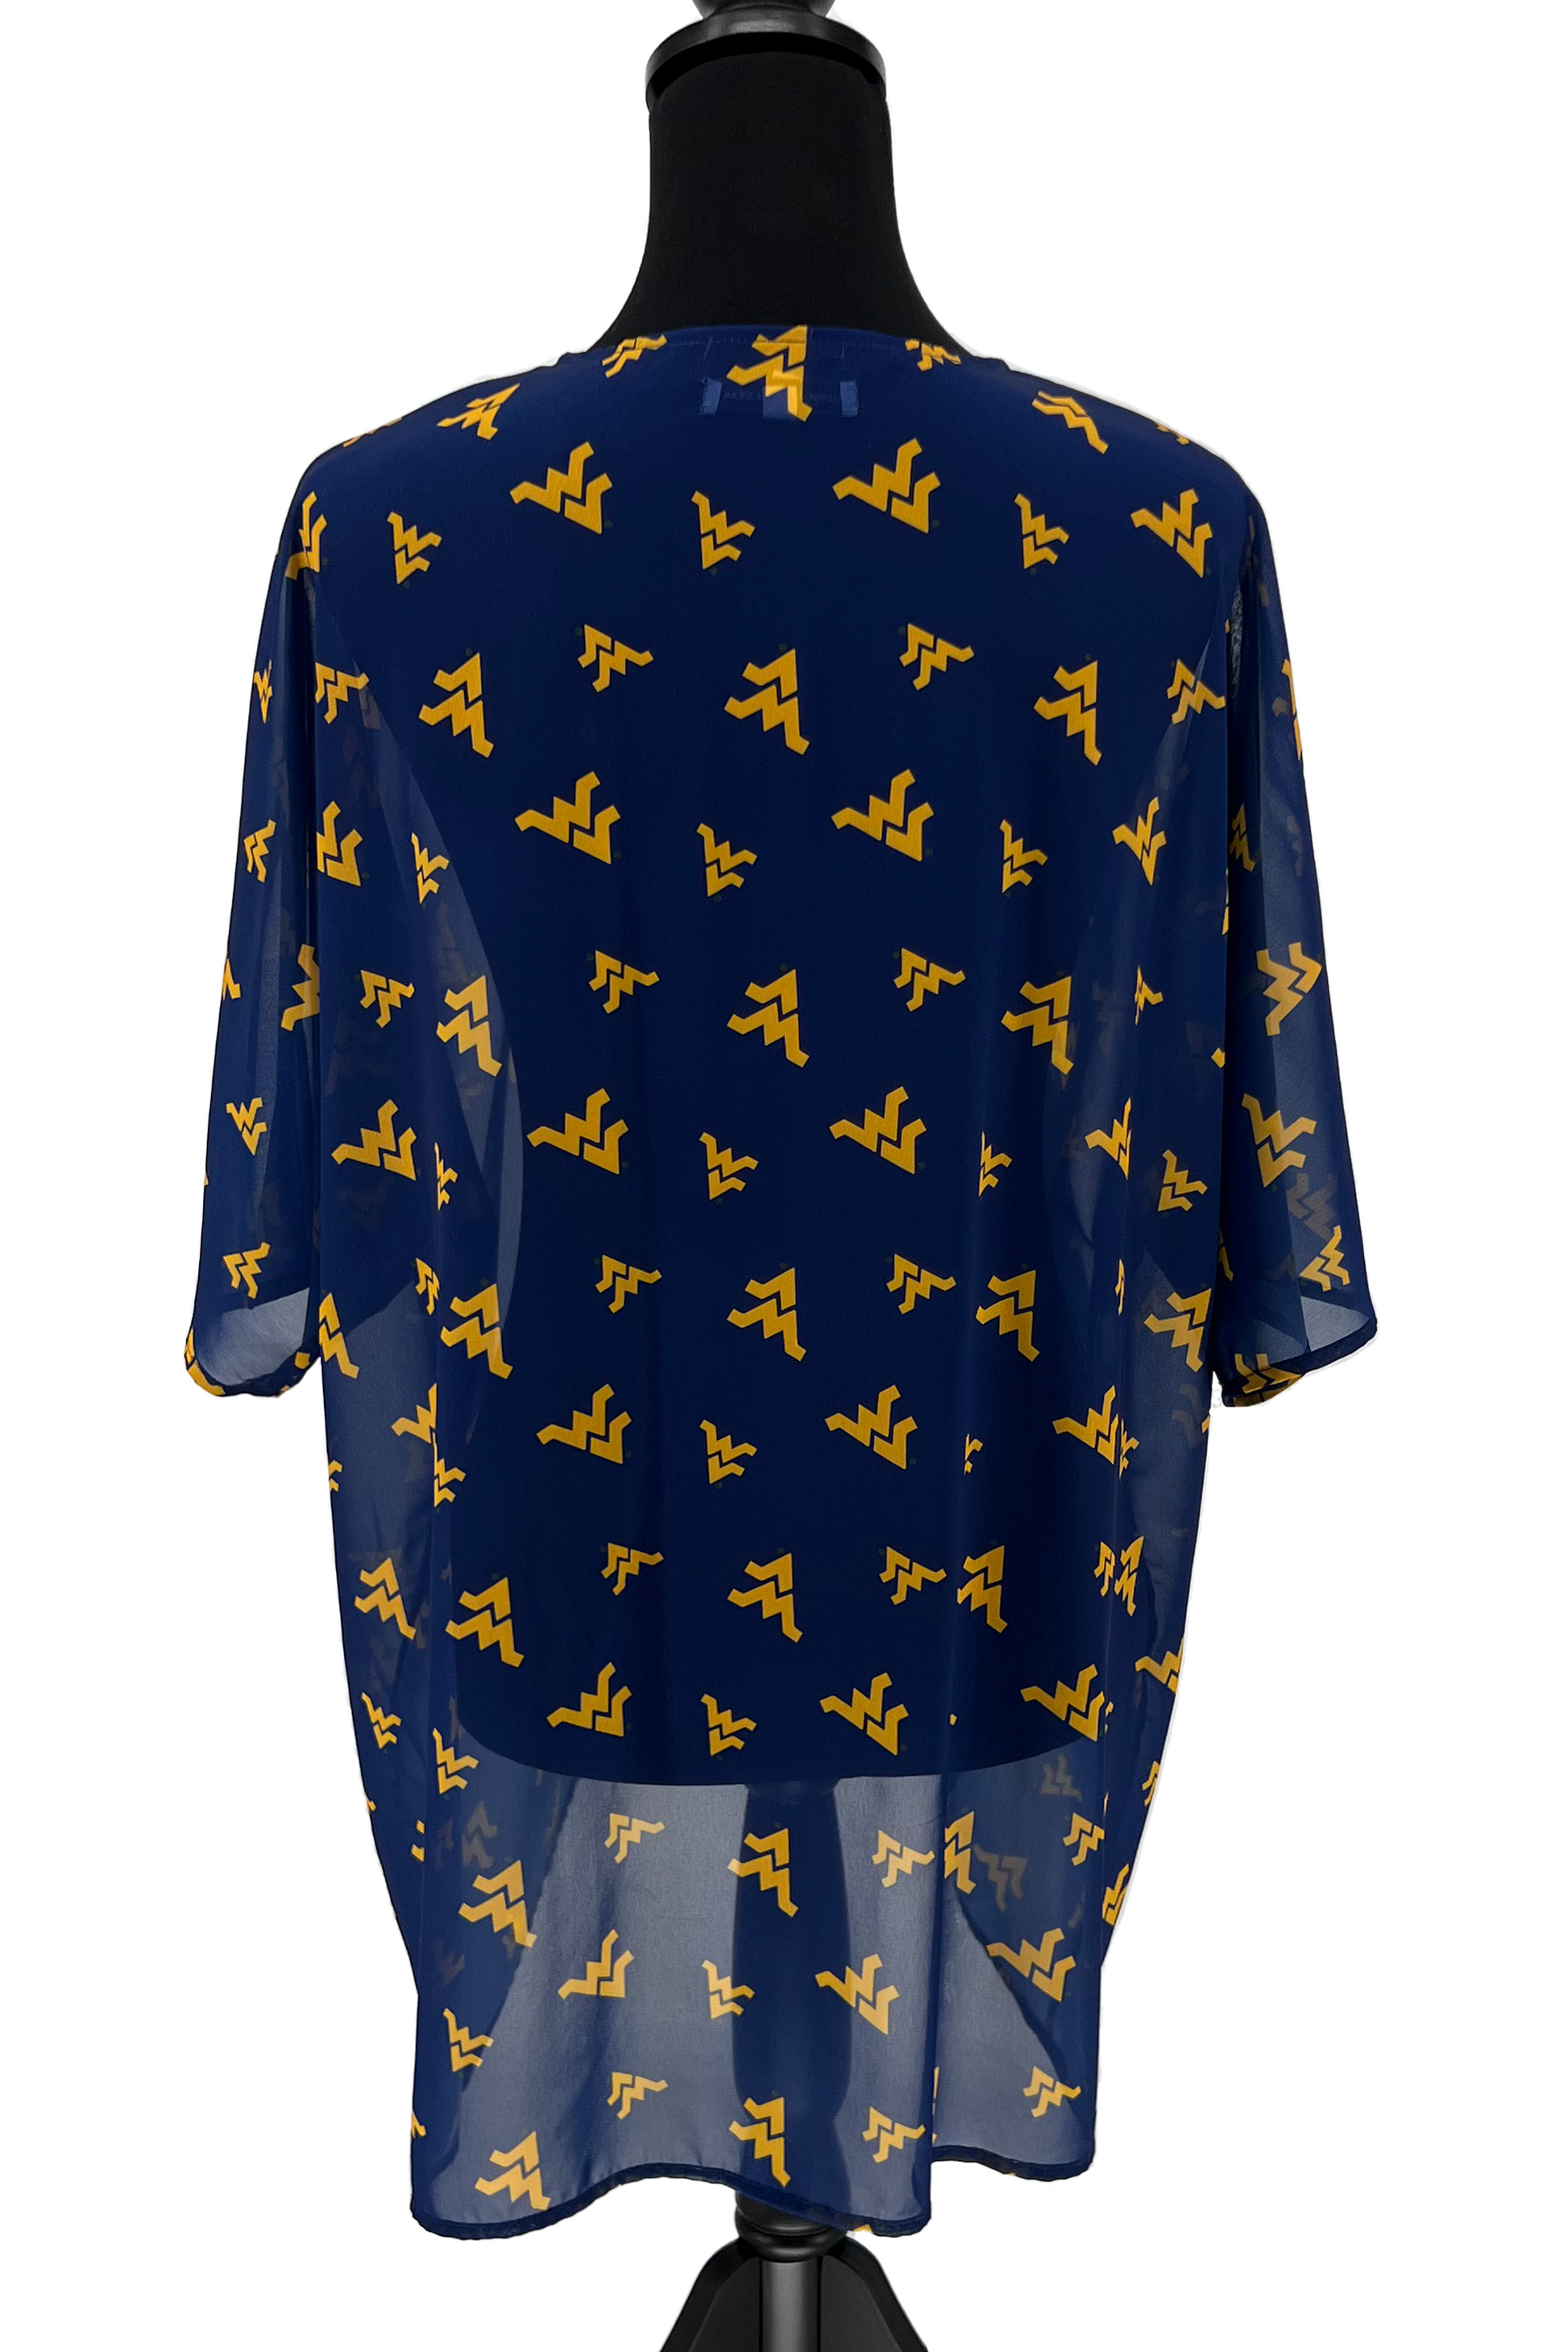 WVU Apparel for women. West Virginia Mountaineers Ladies Blue and Gold Cardigan Kimono Short Sleeve Top